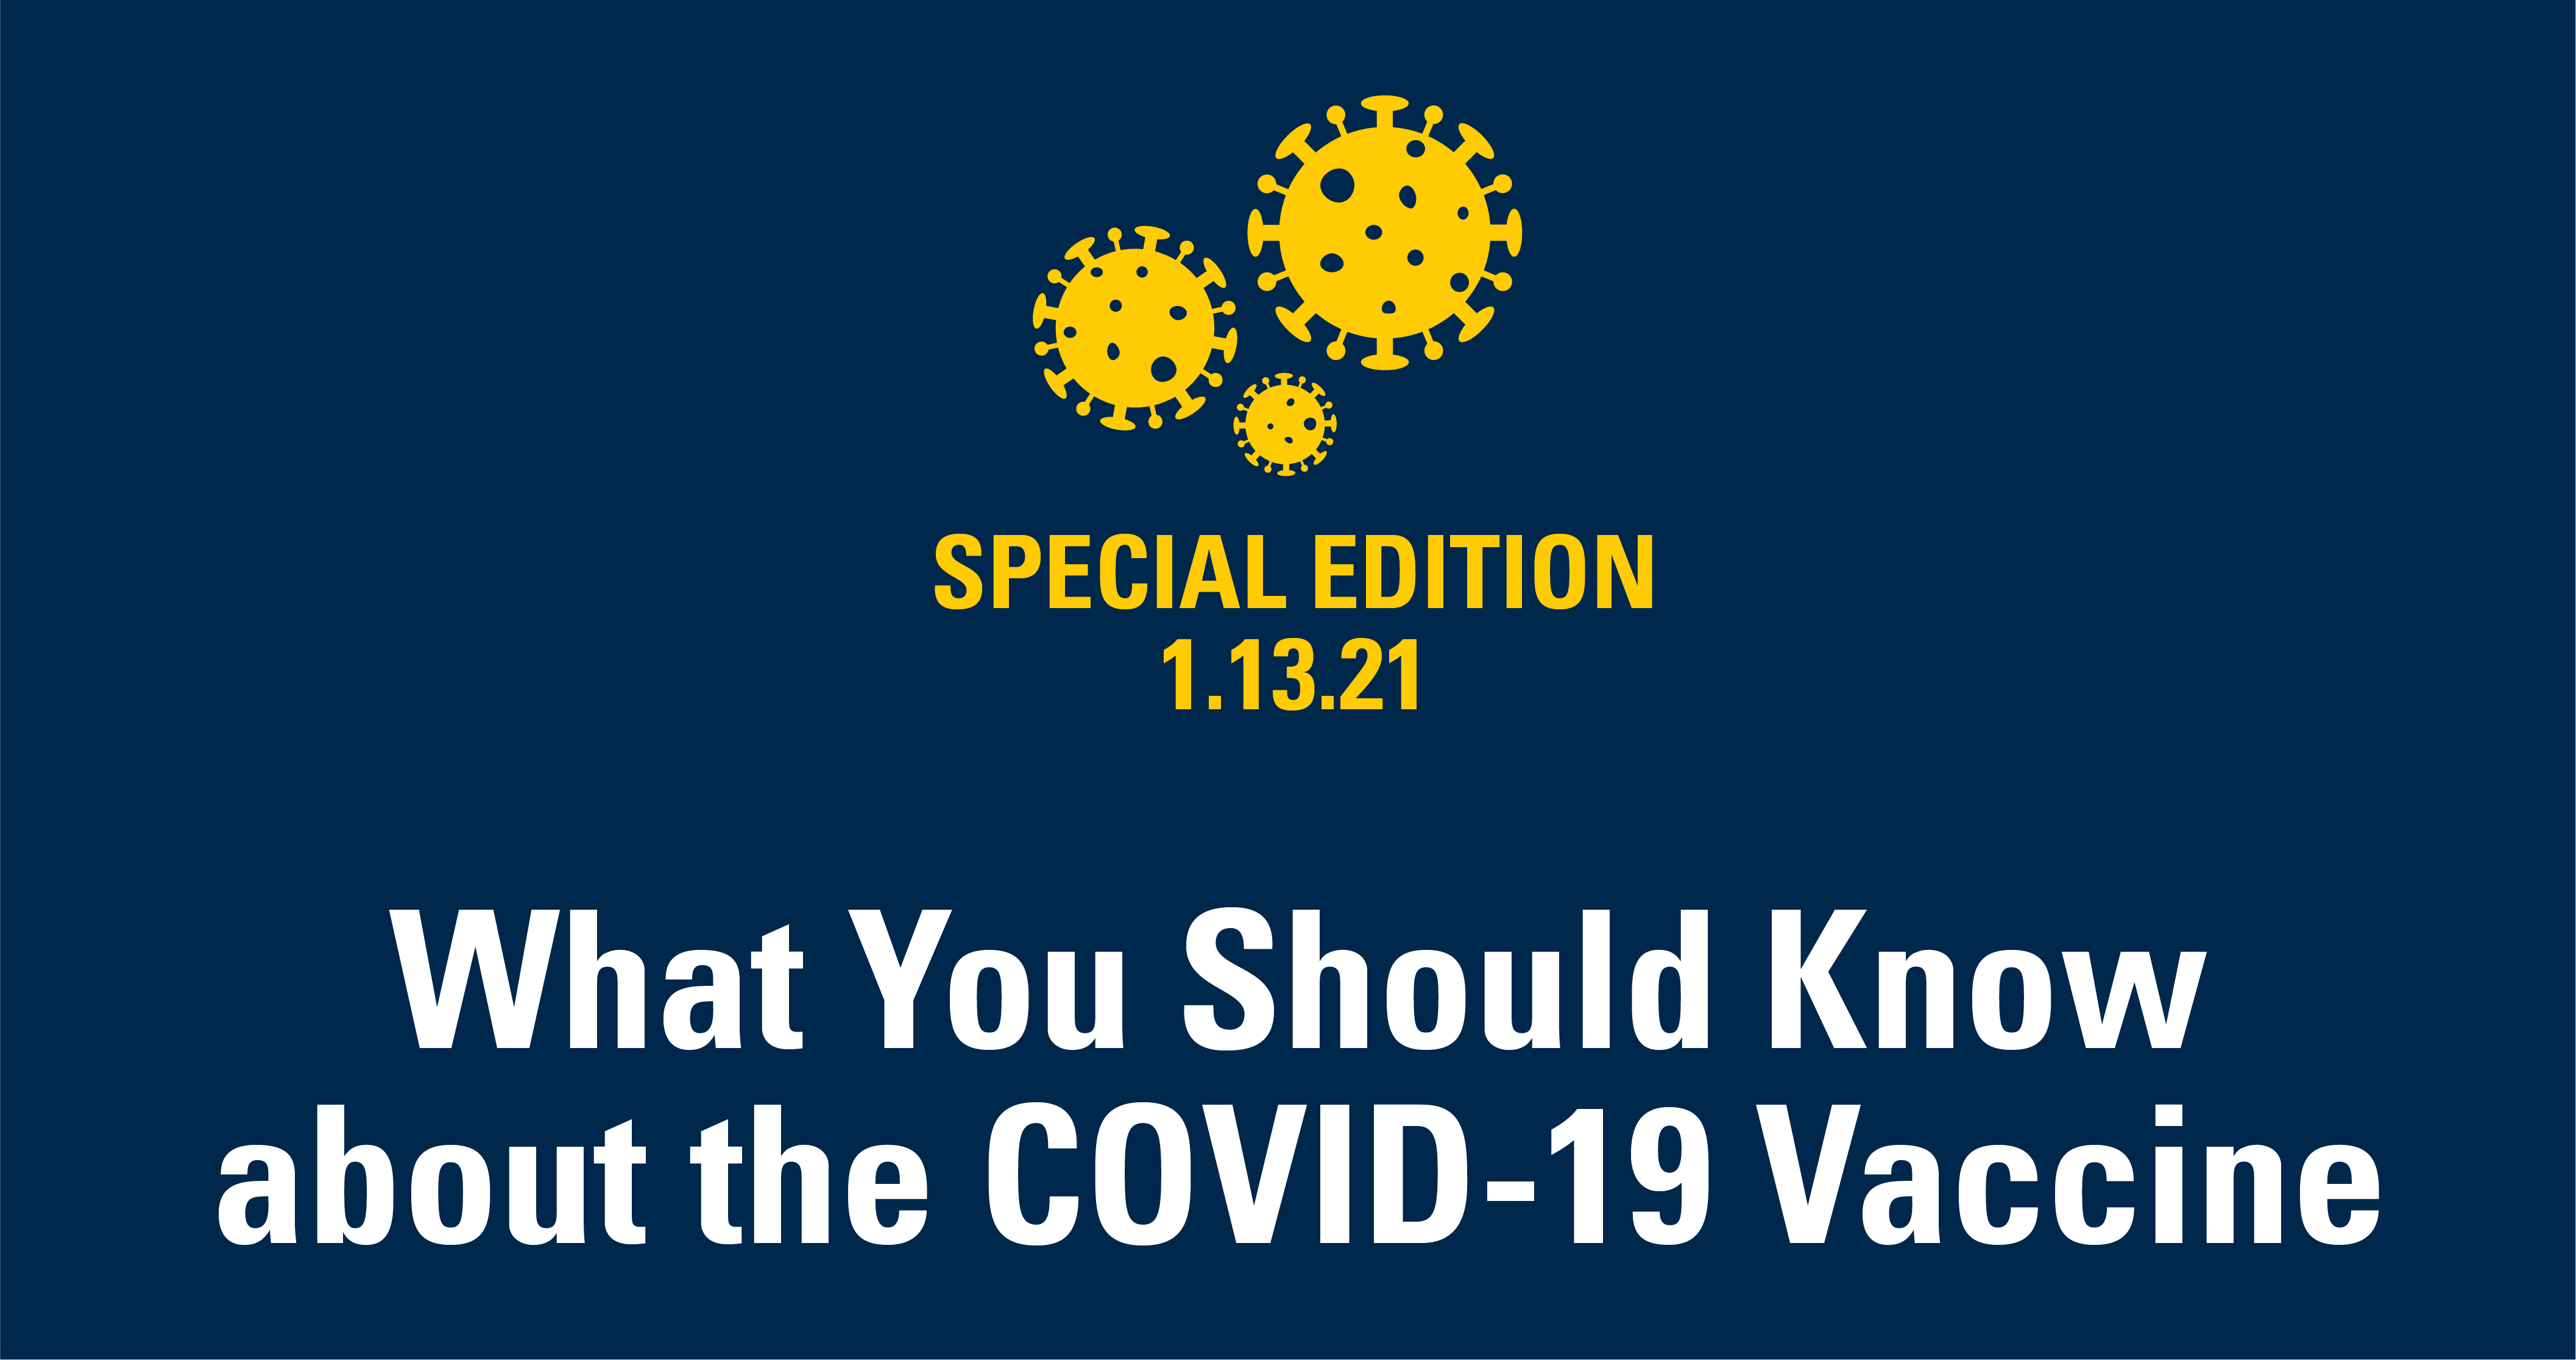 What You Should Know about the COVID-19 Vaccine